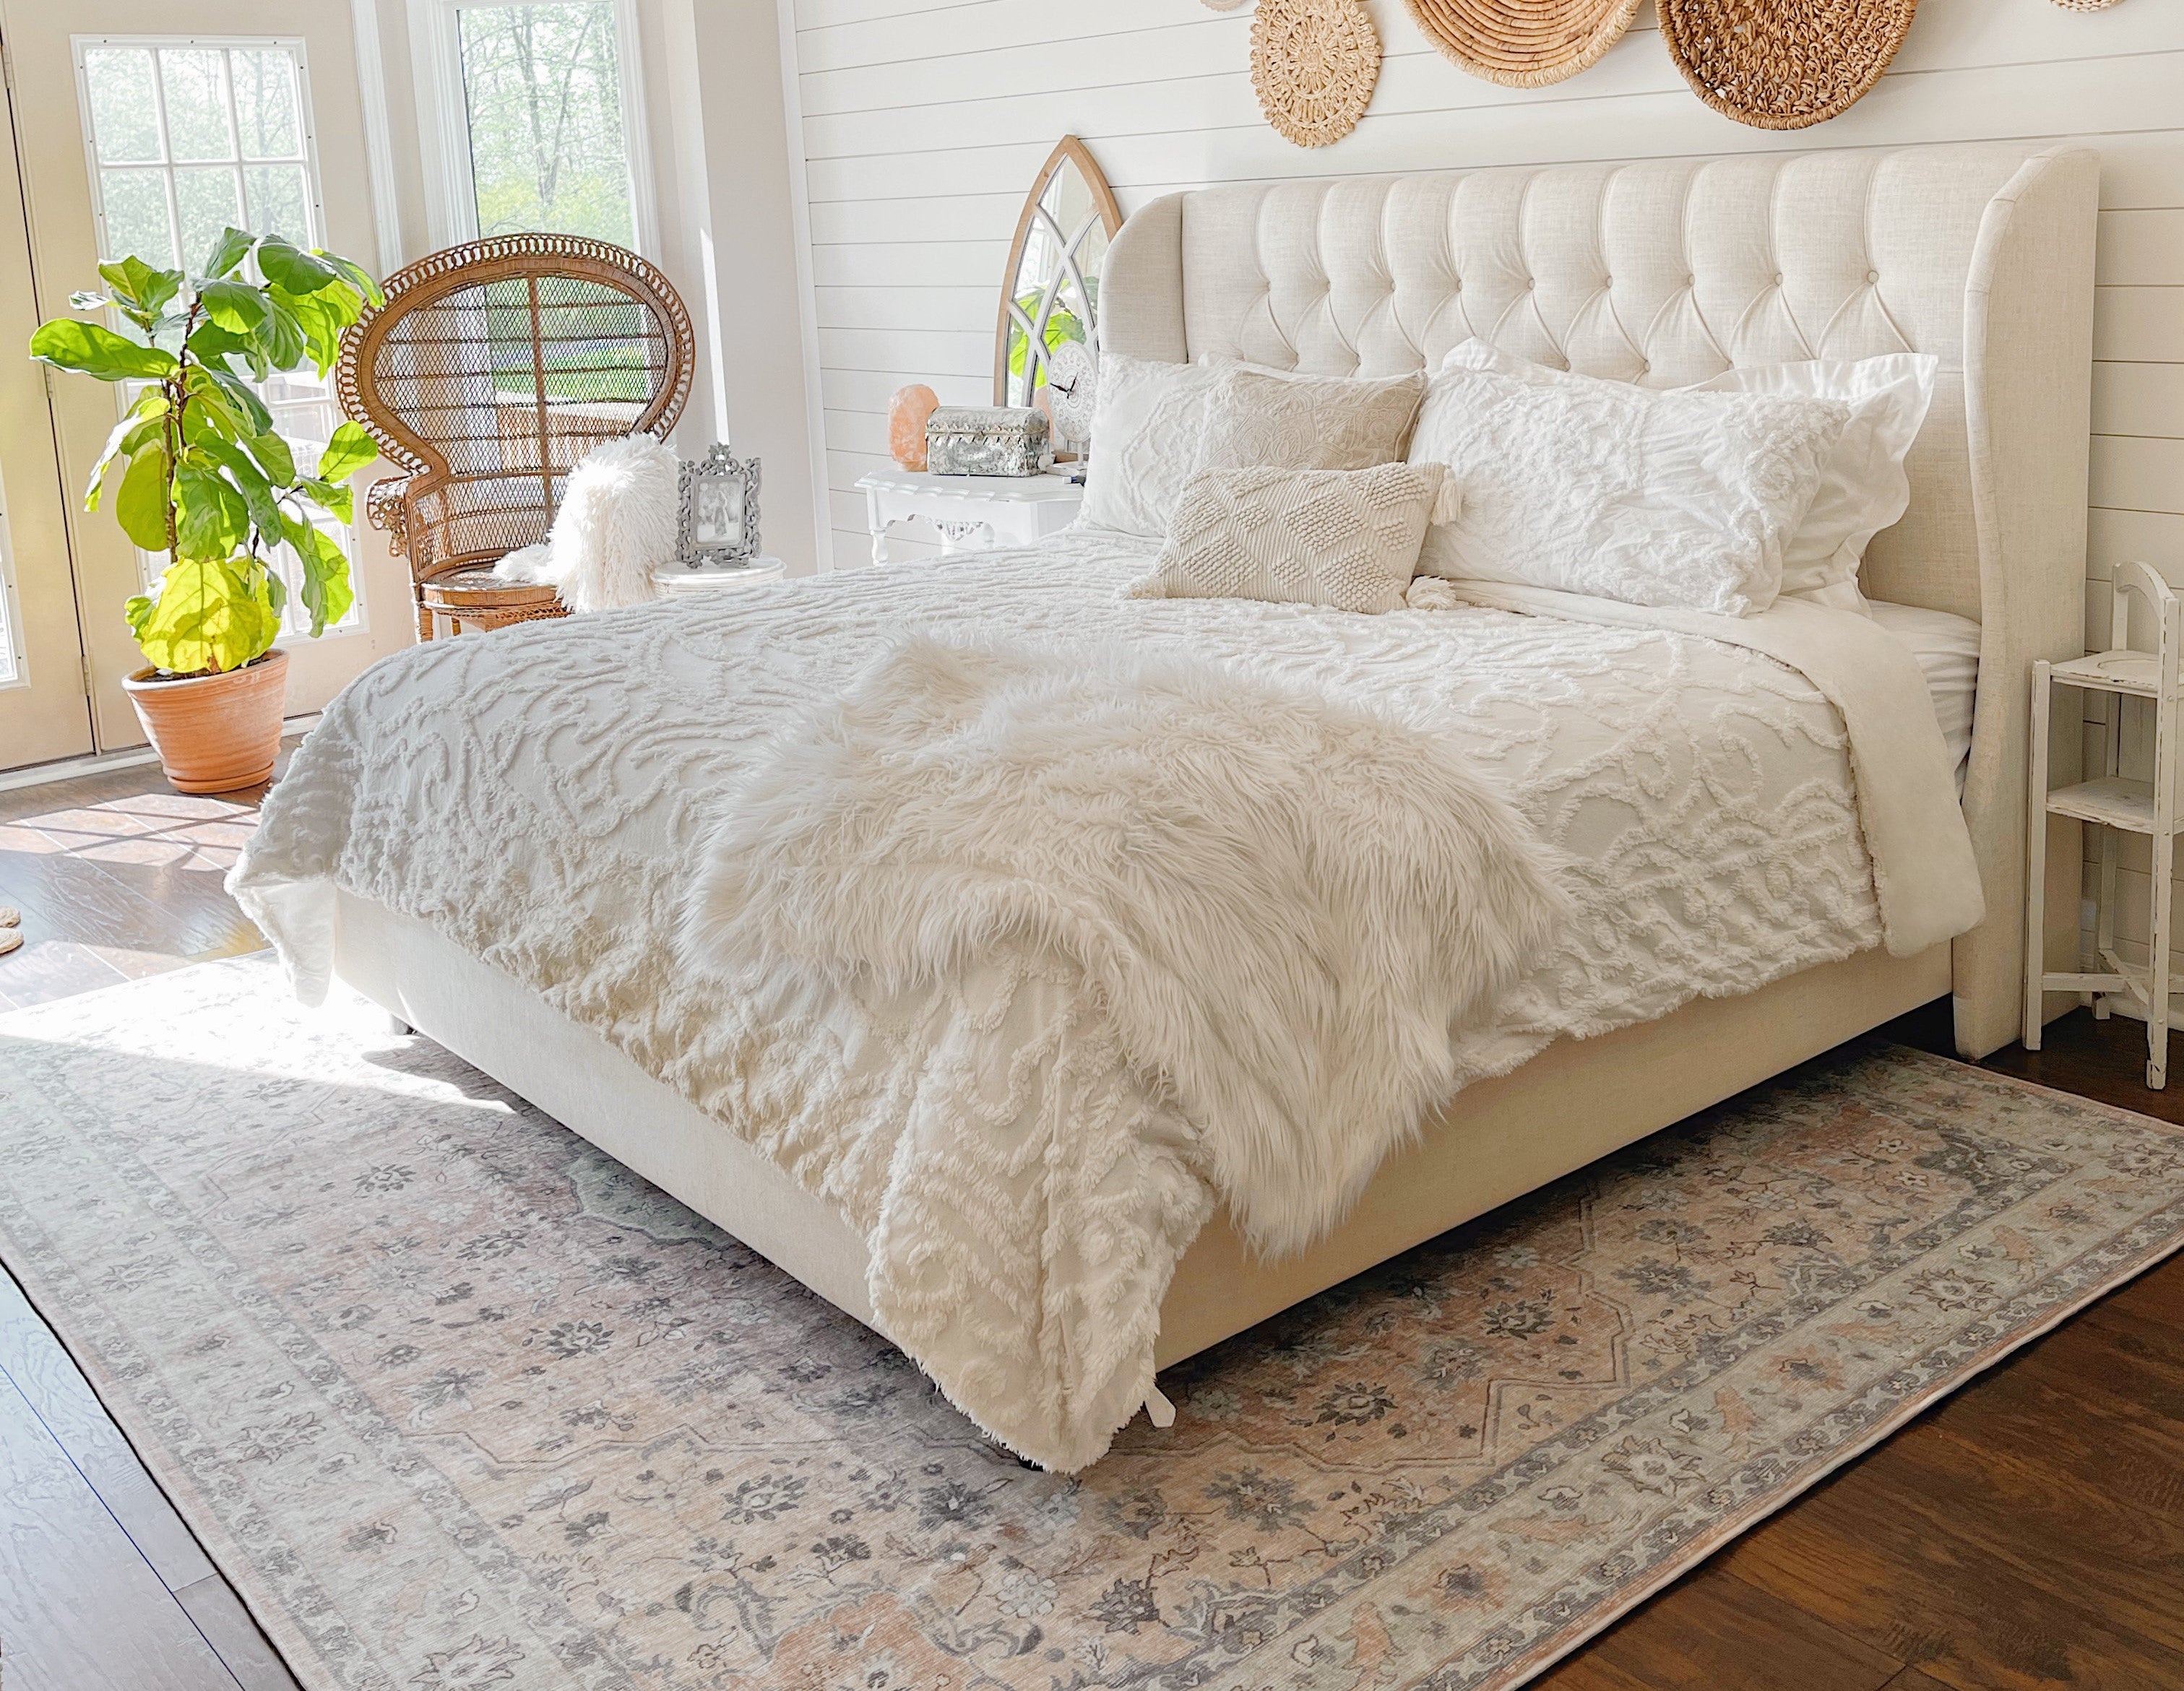 What Size Rug Do You Need Under a King Bed?